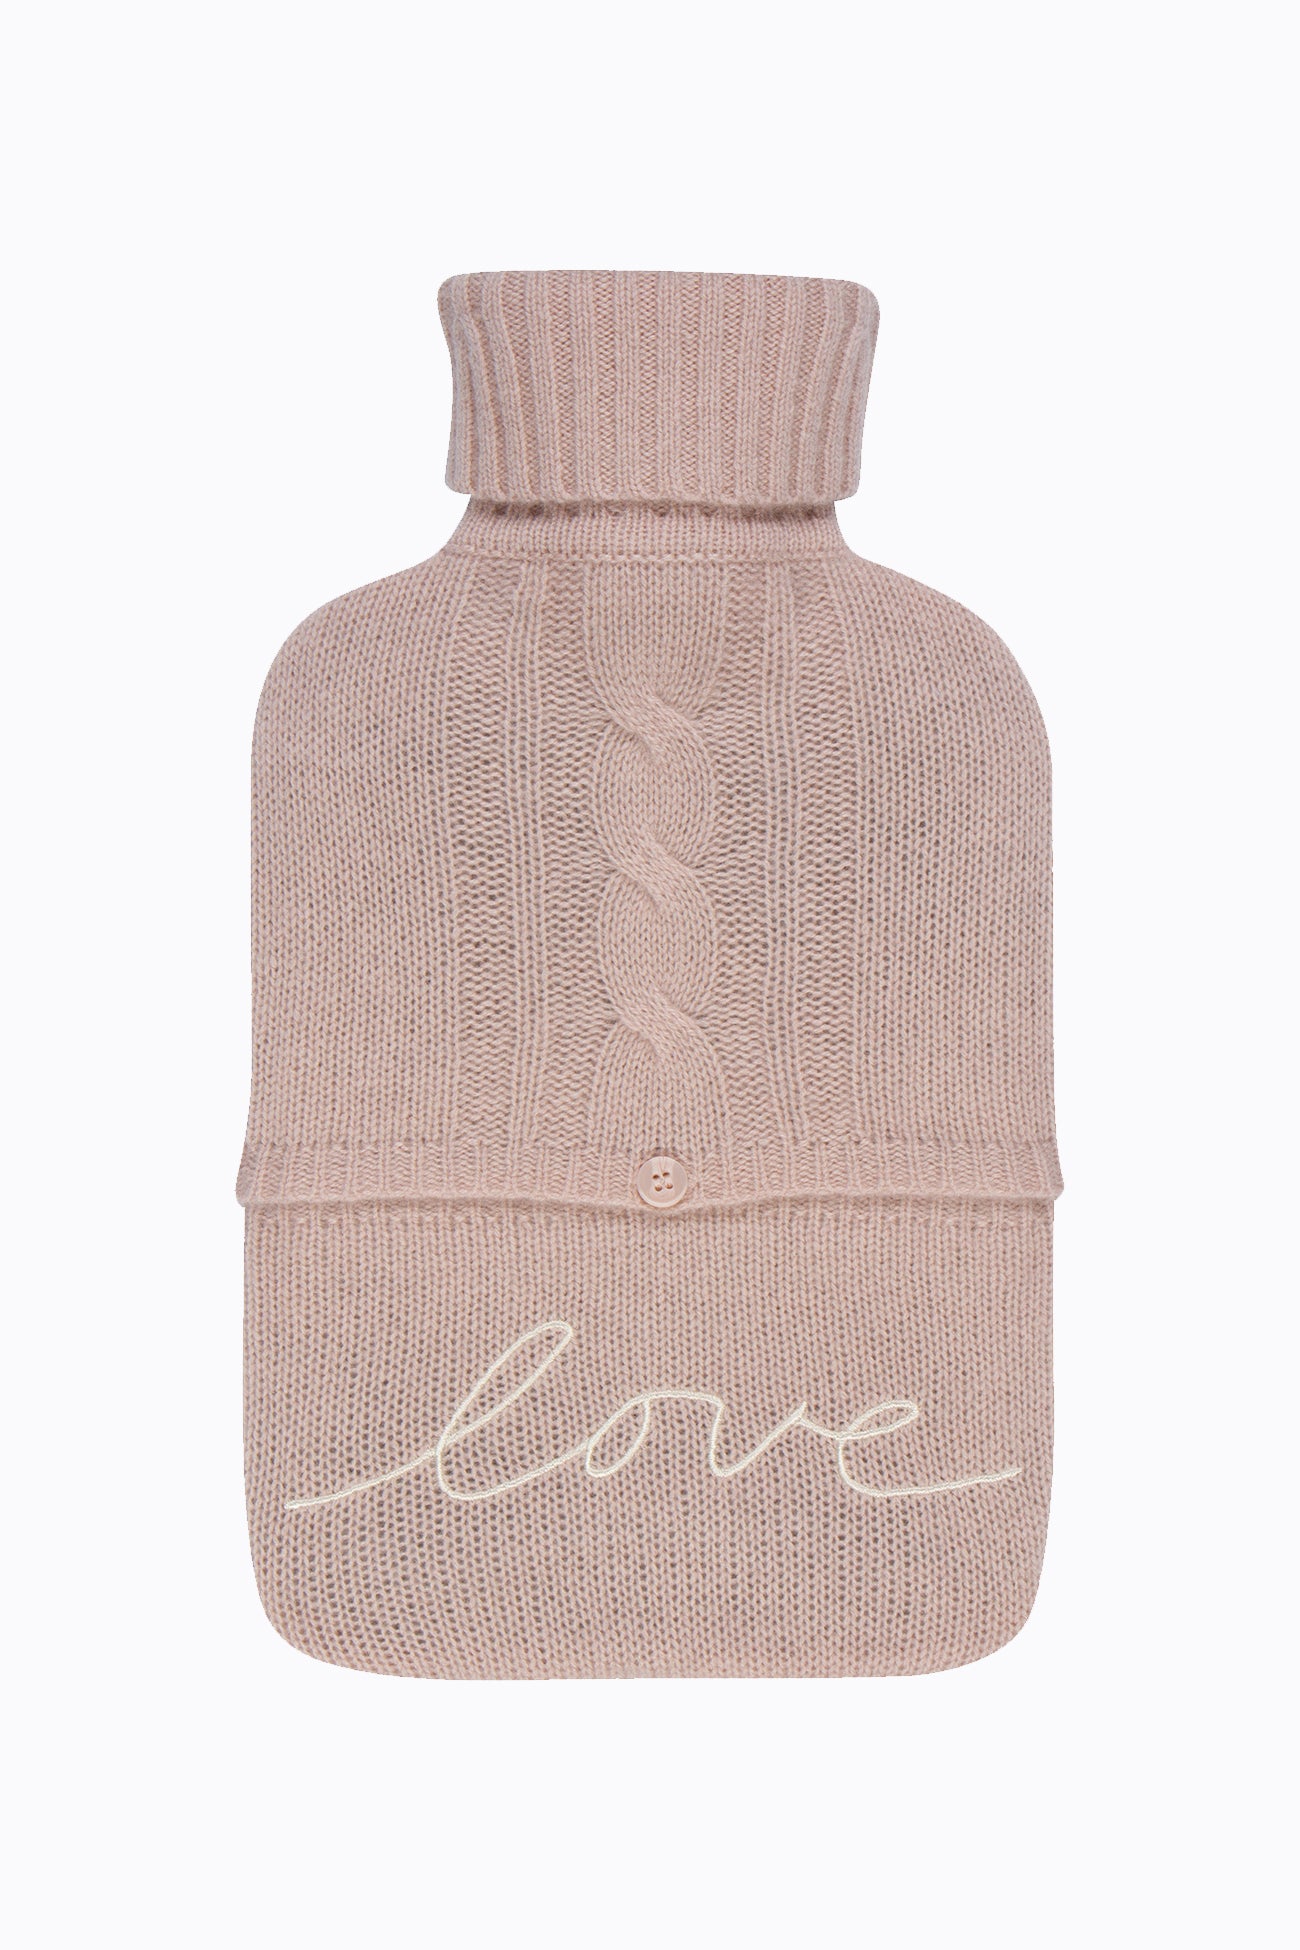 Image of LOVE HOT WATER BOTTLE